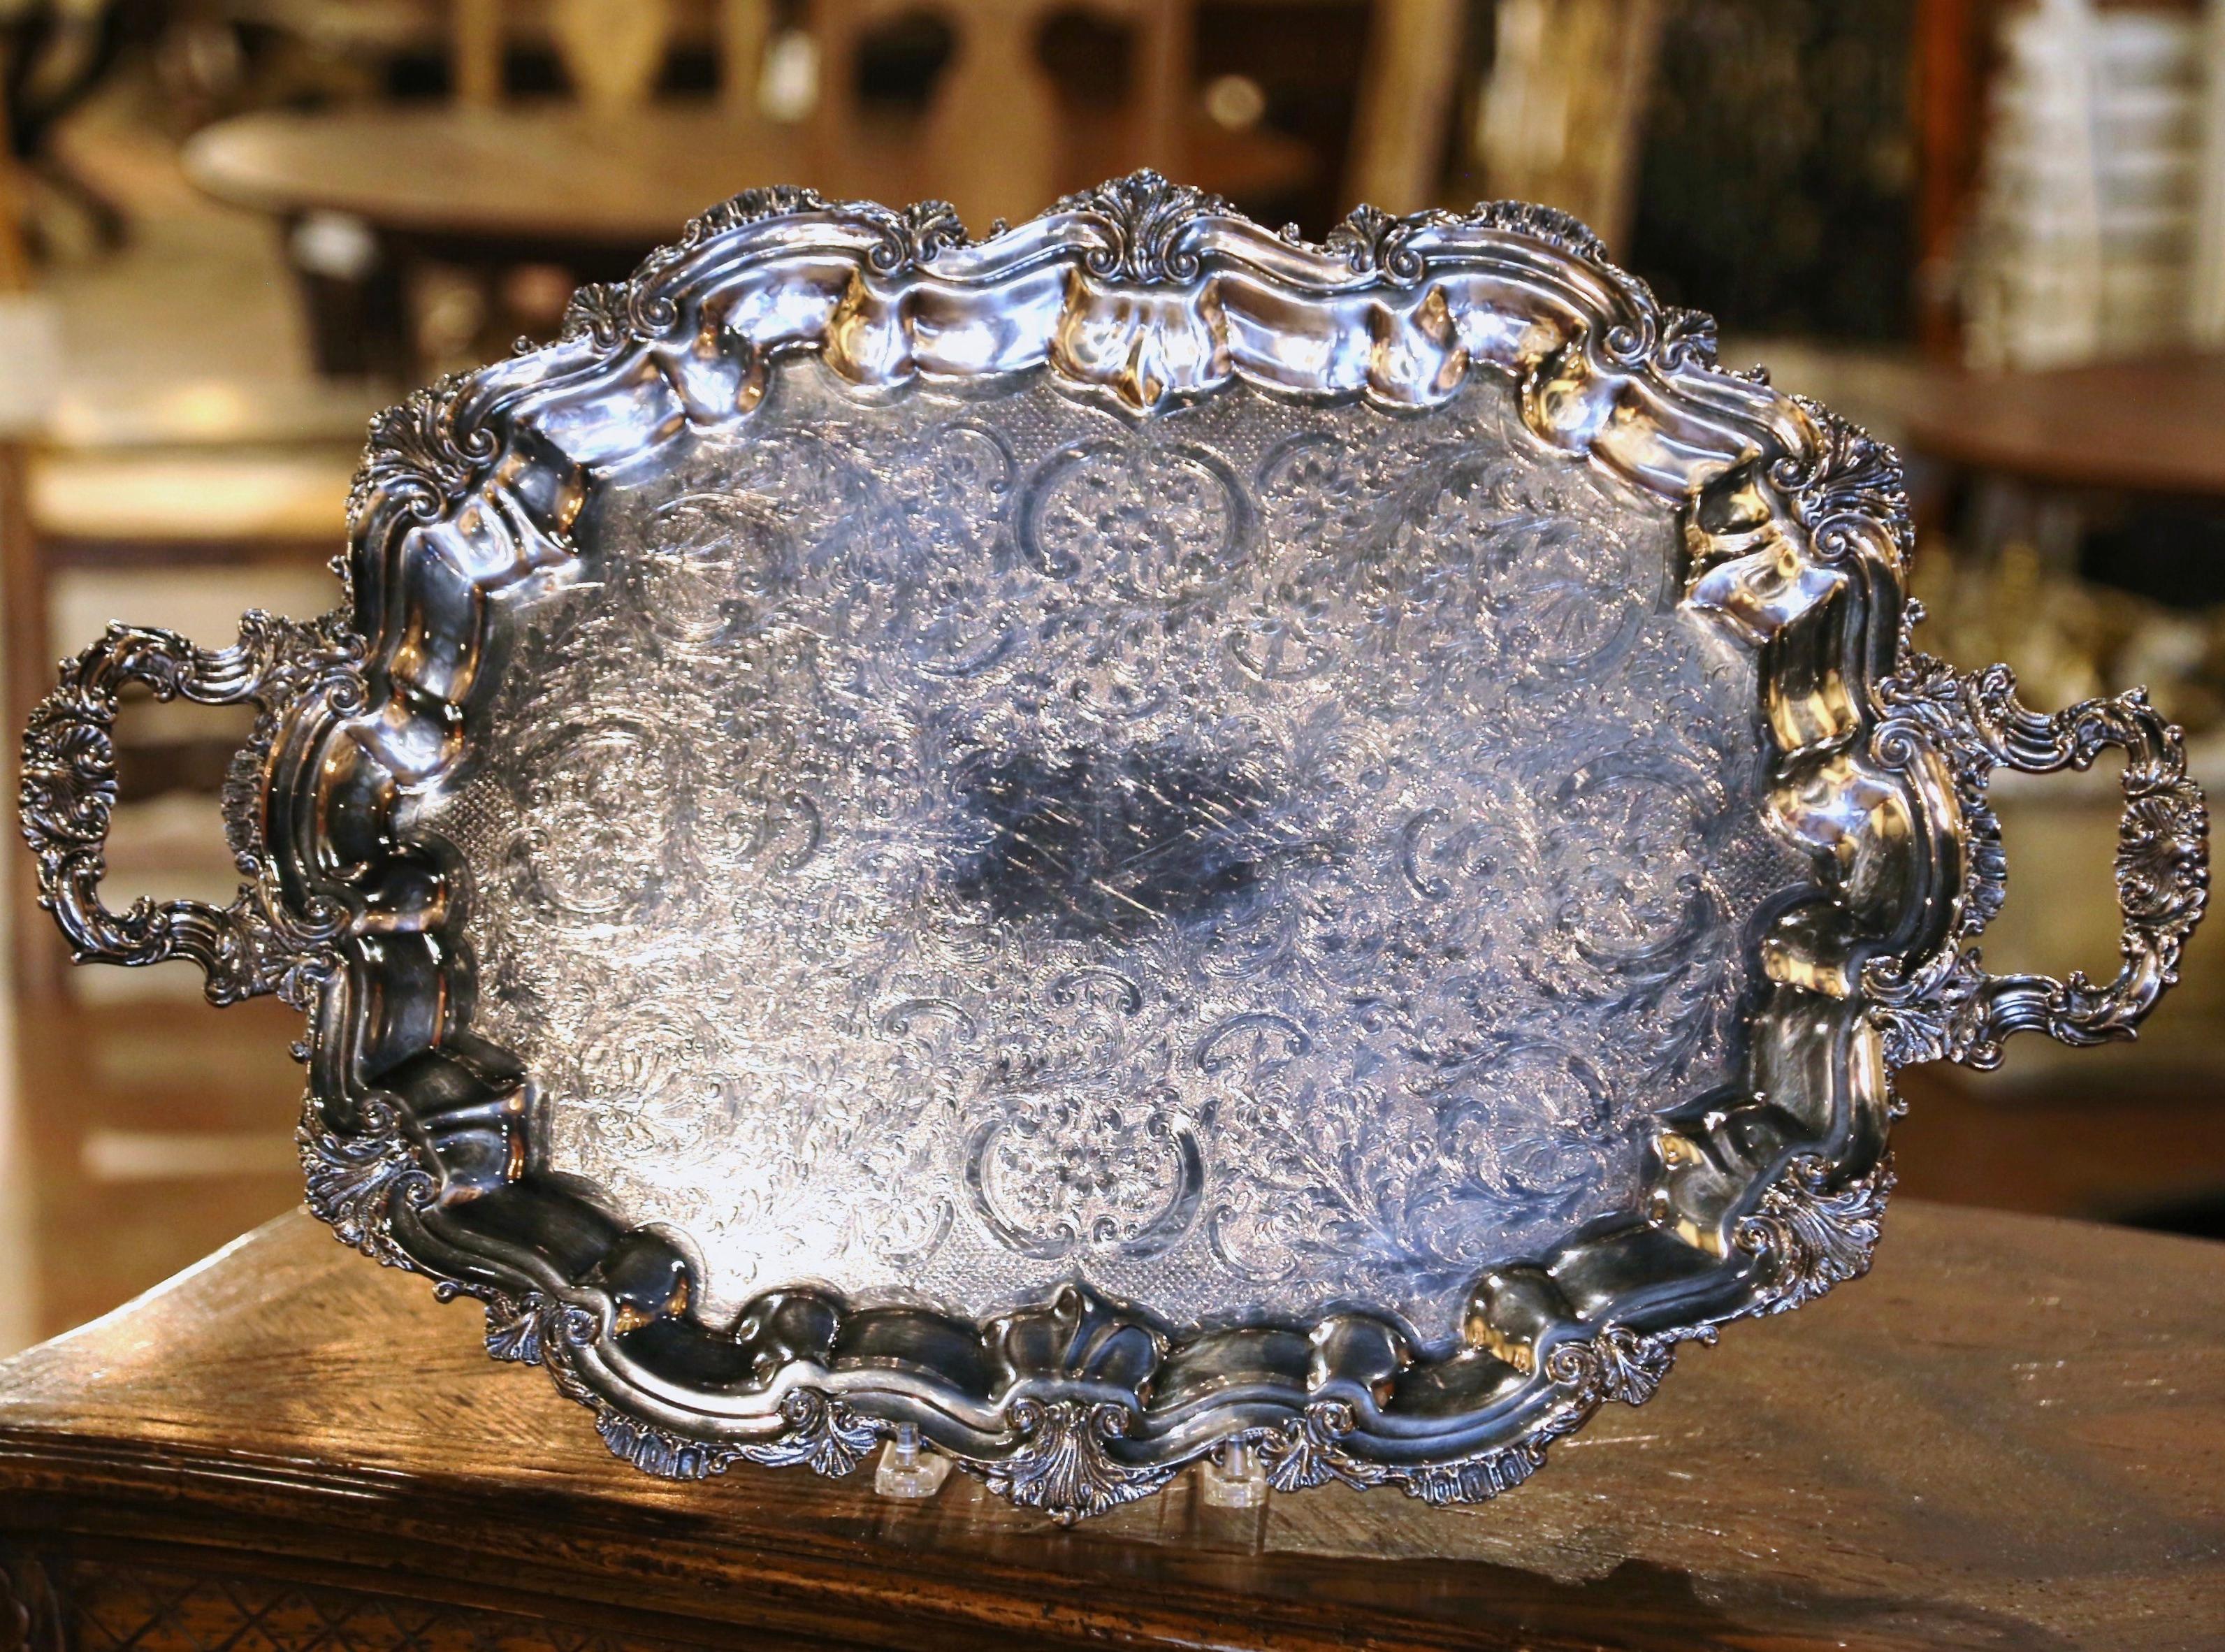 Serve food in style on this elegant antique tray. Crafted in France circa 1950, the decorative tray sits on four curved feet decorated with shell motifs, and features ornate handles on the sides, elaborate scalloped scrolls around the perimeter and